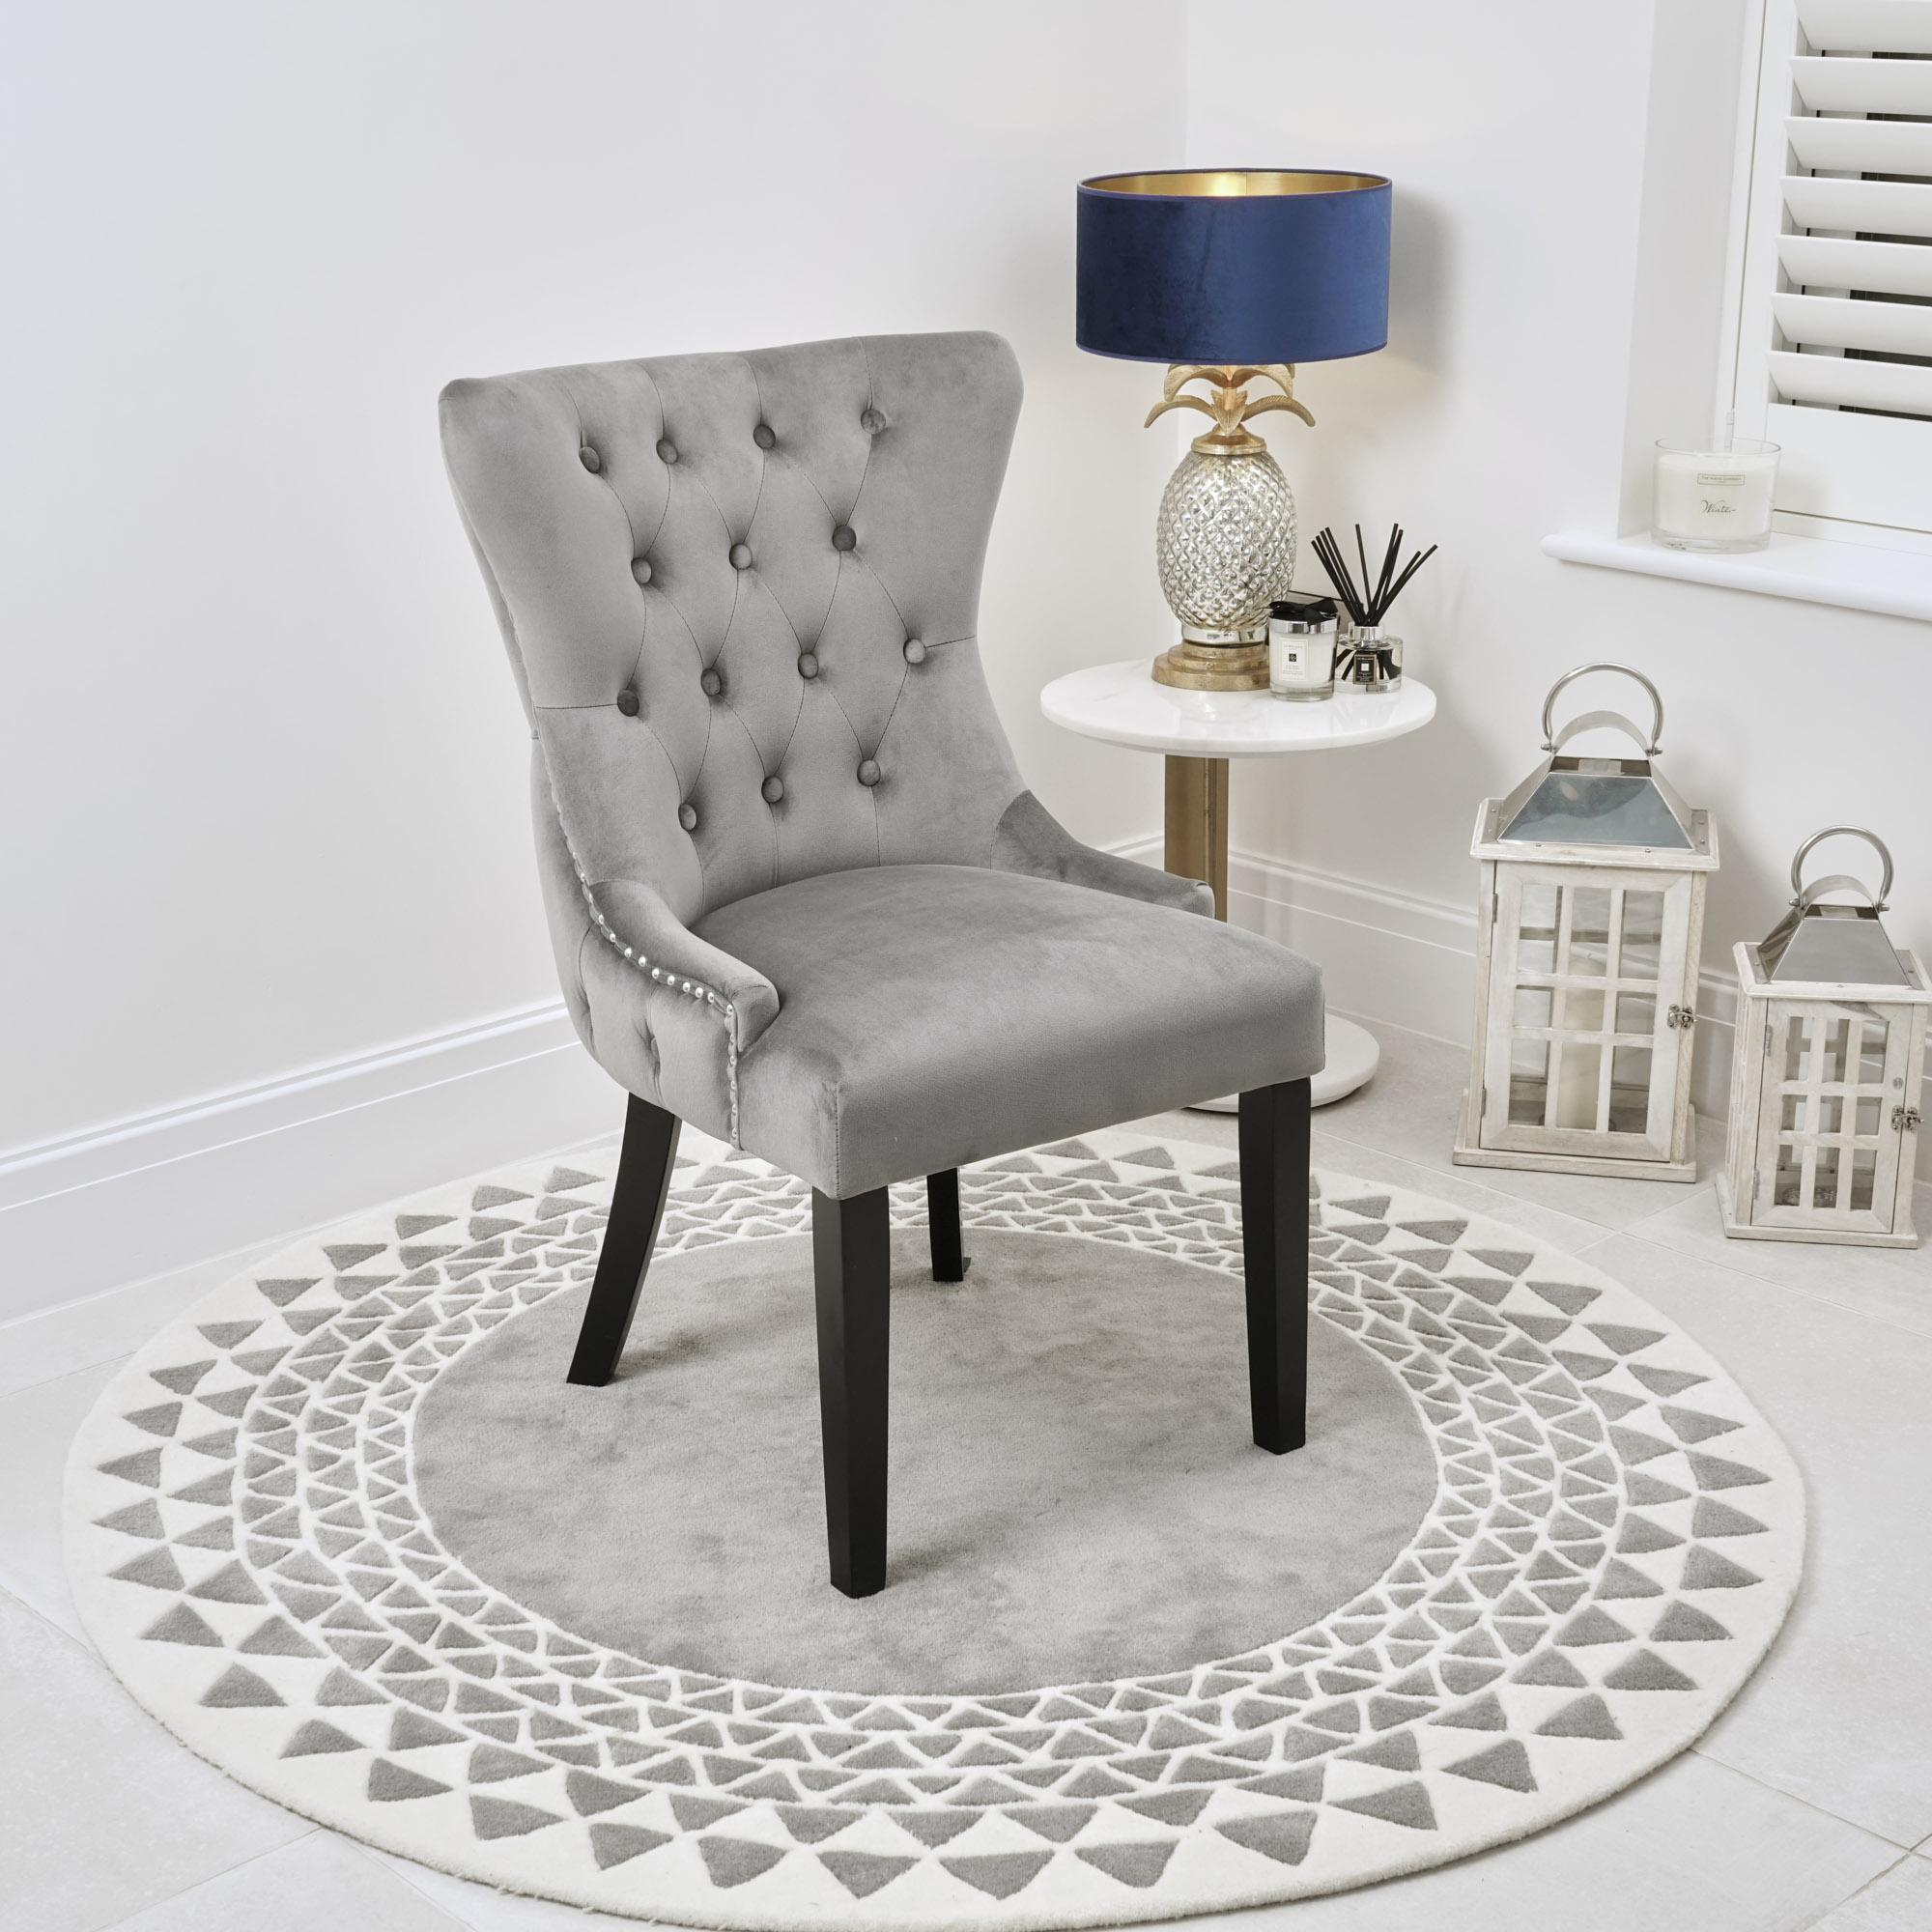 Knightsbridge Grey Velvet Upholstered Dining Room Chair With Button Tufted Detailing – Black Legs